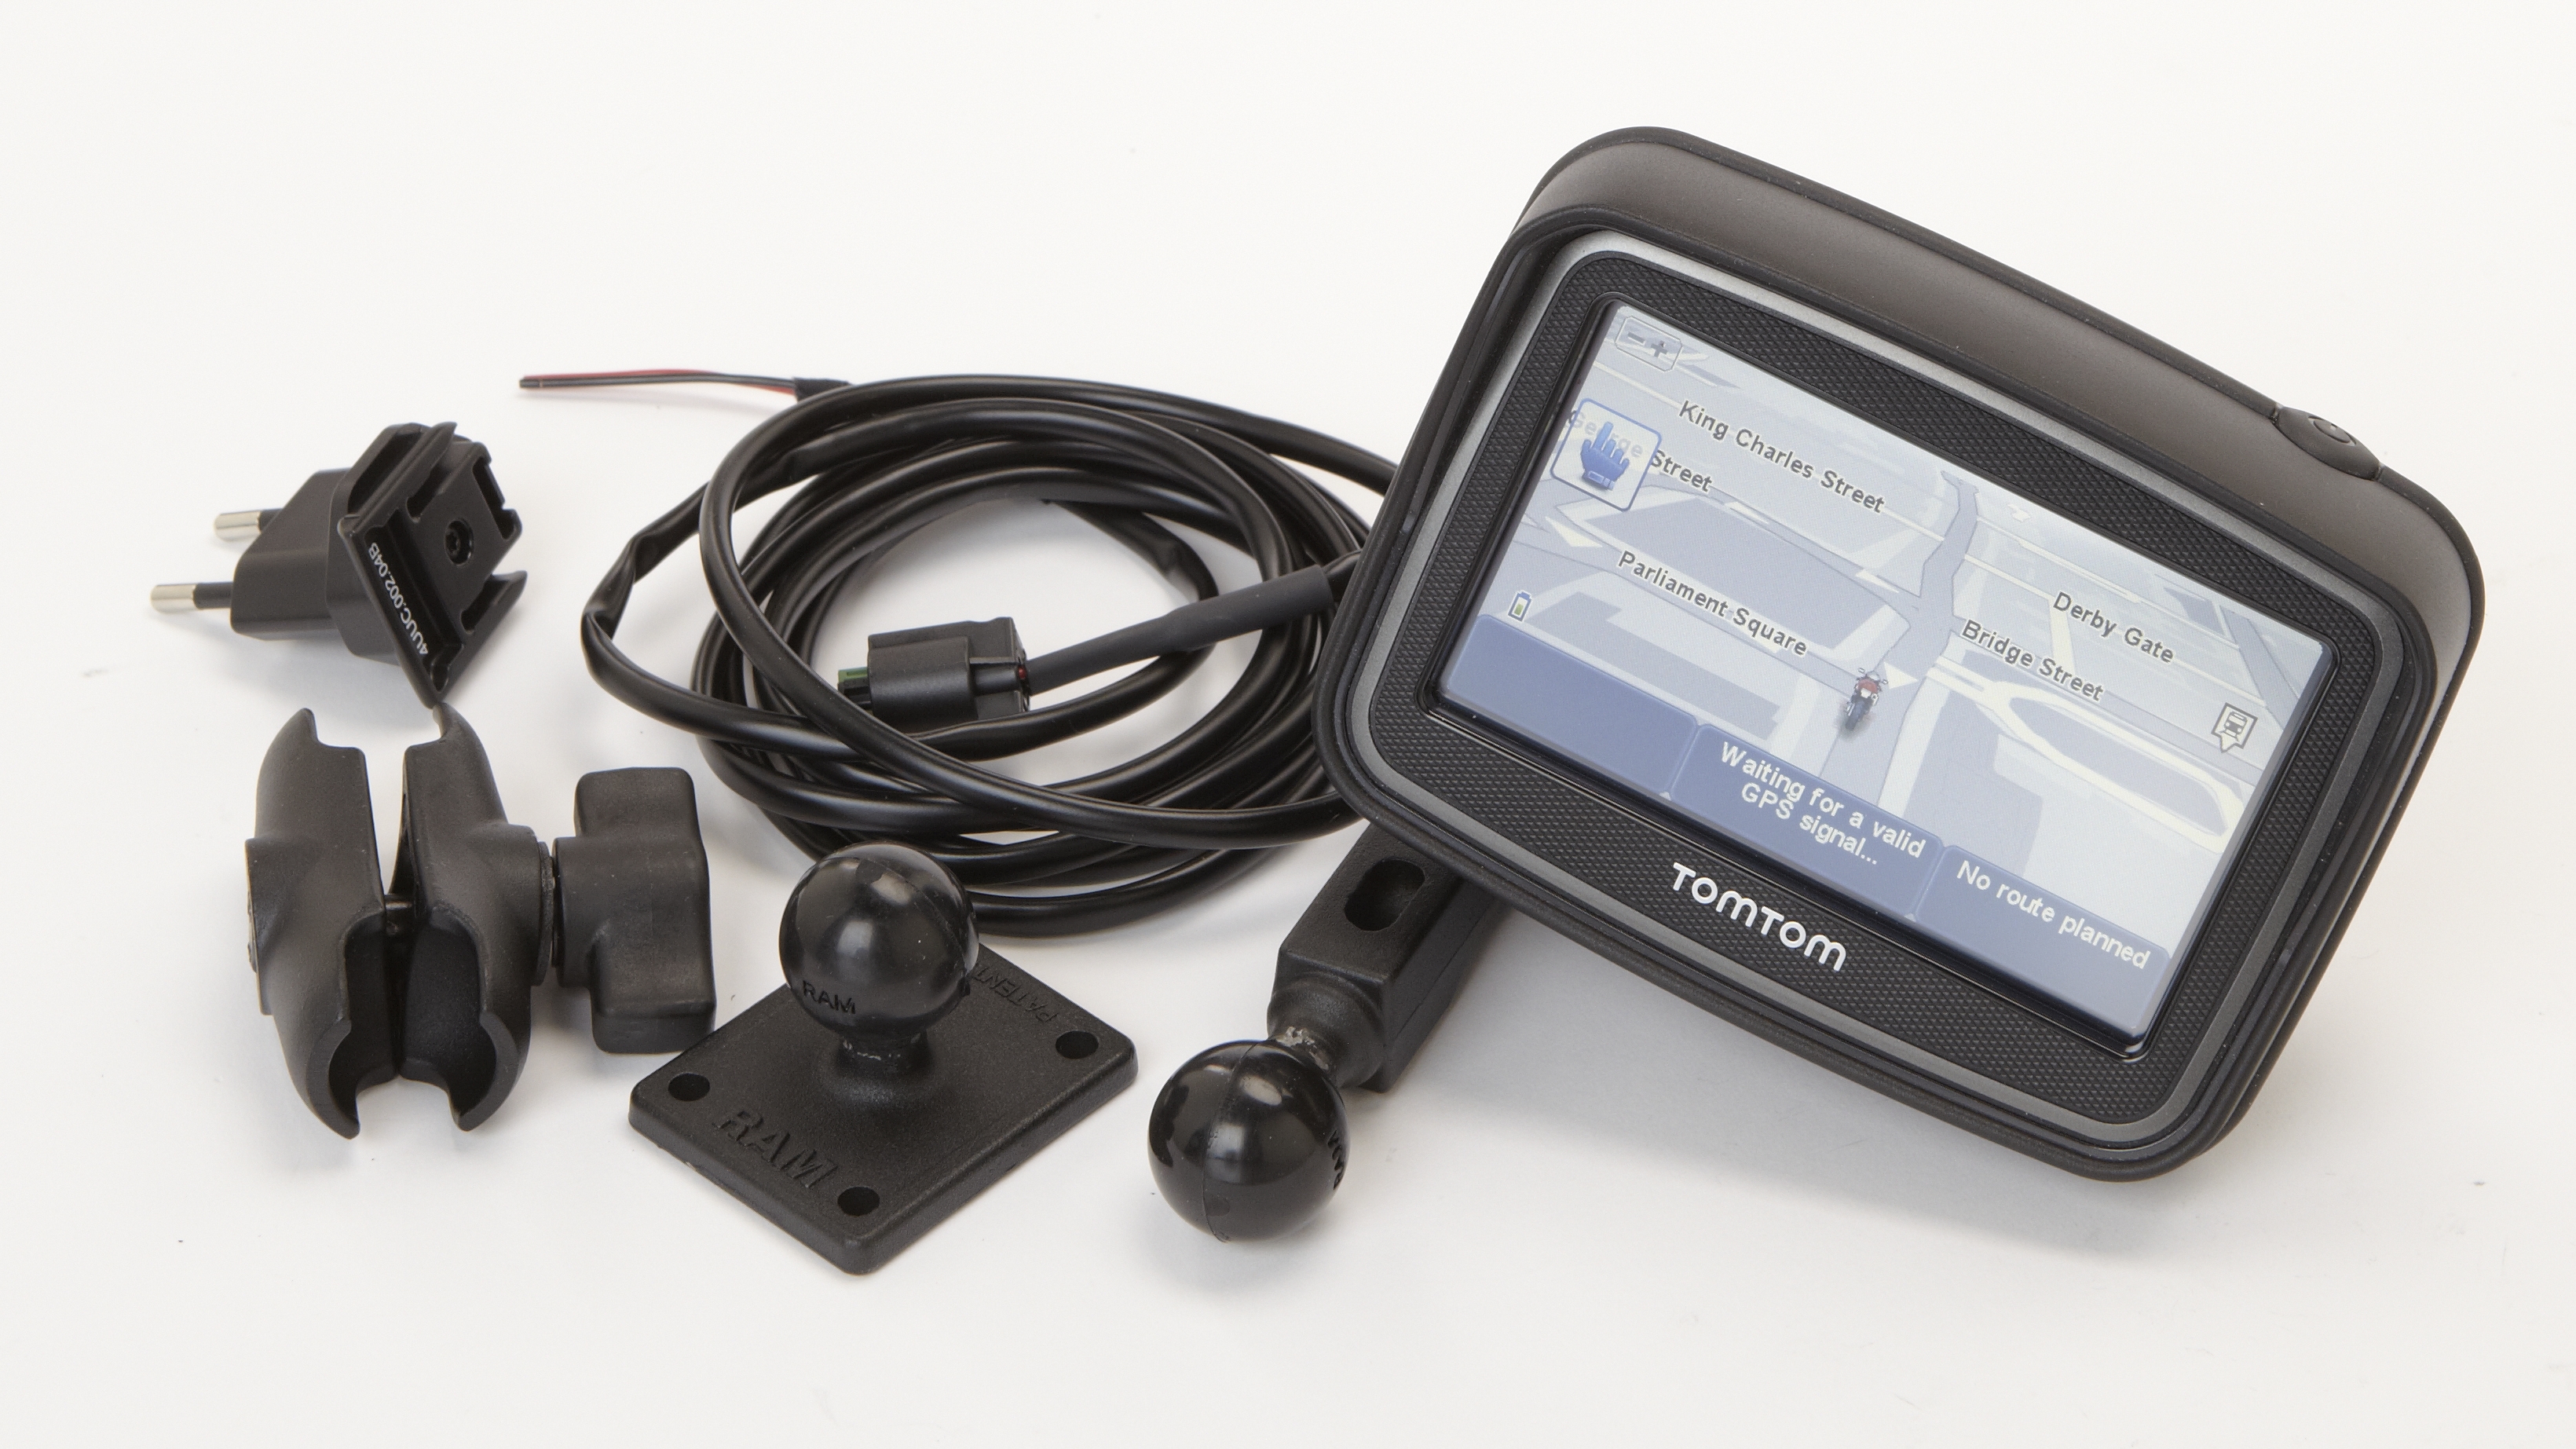 TomTom Rider review |